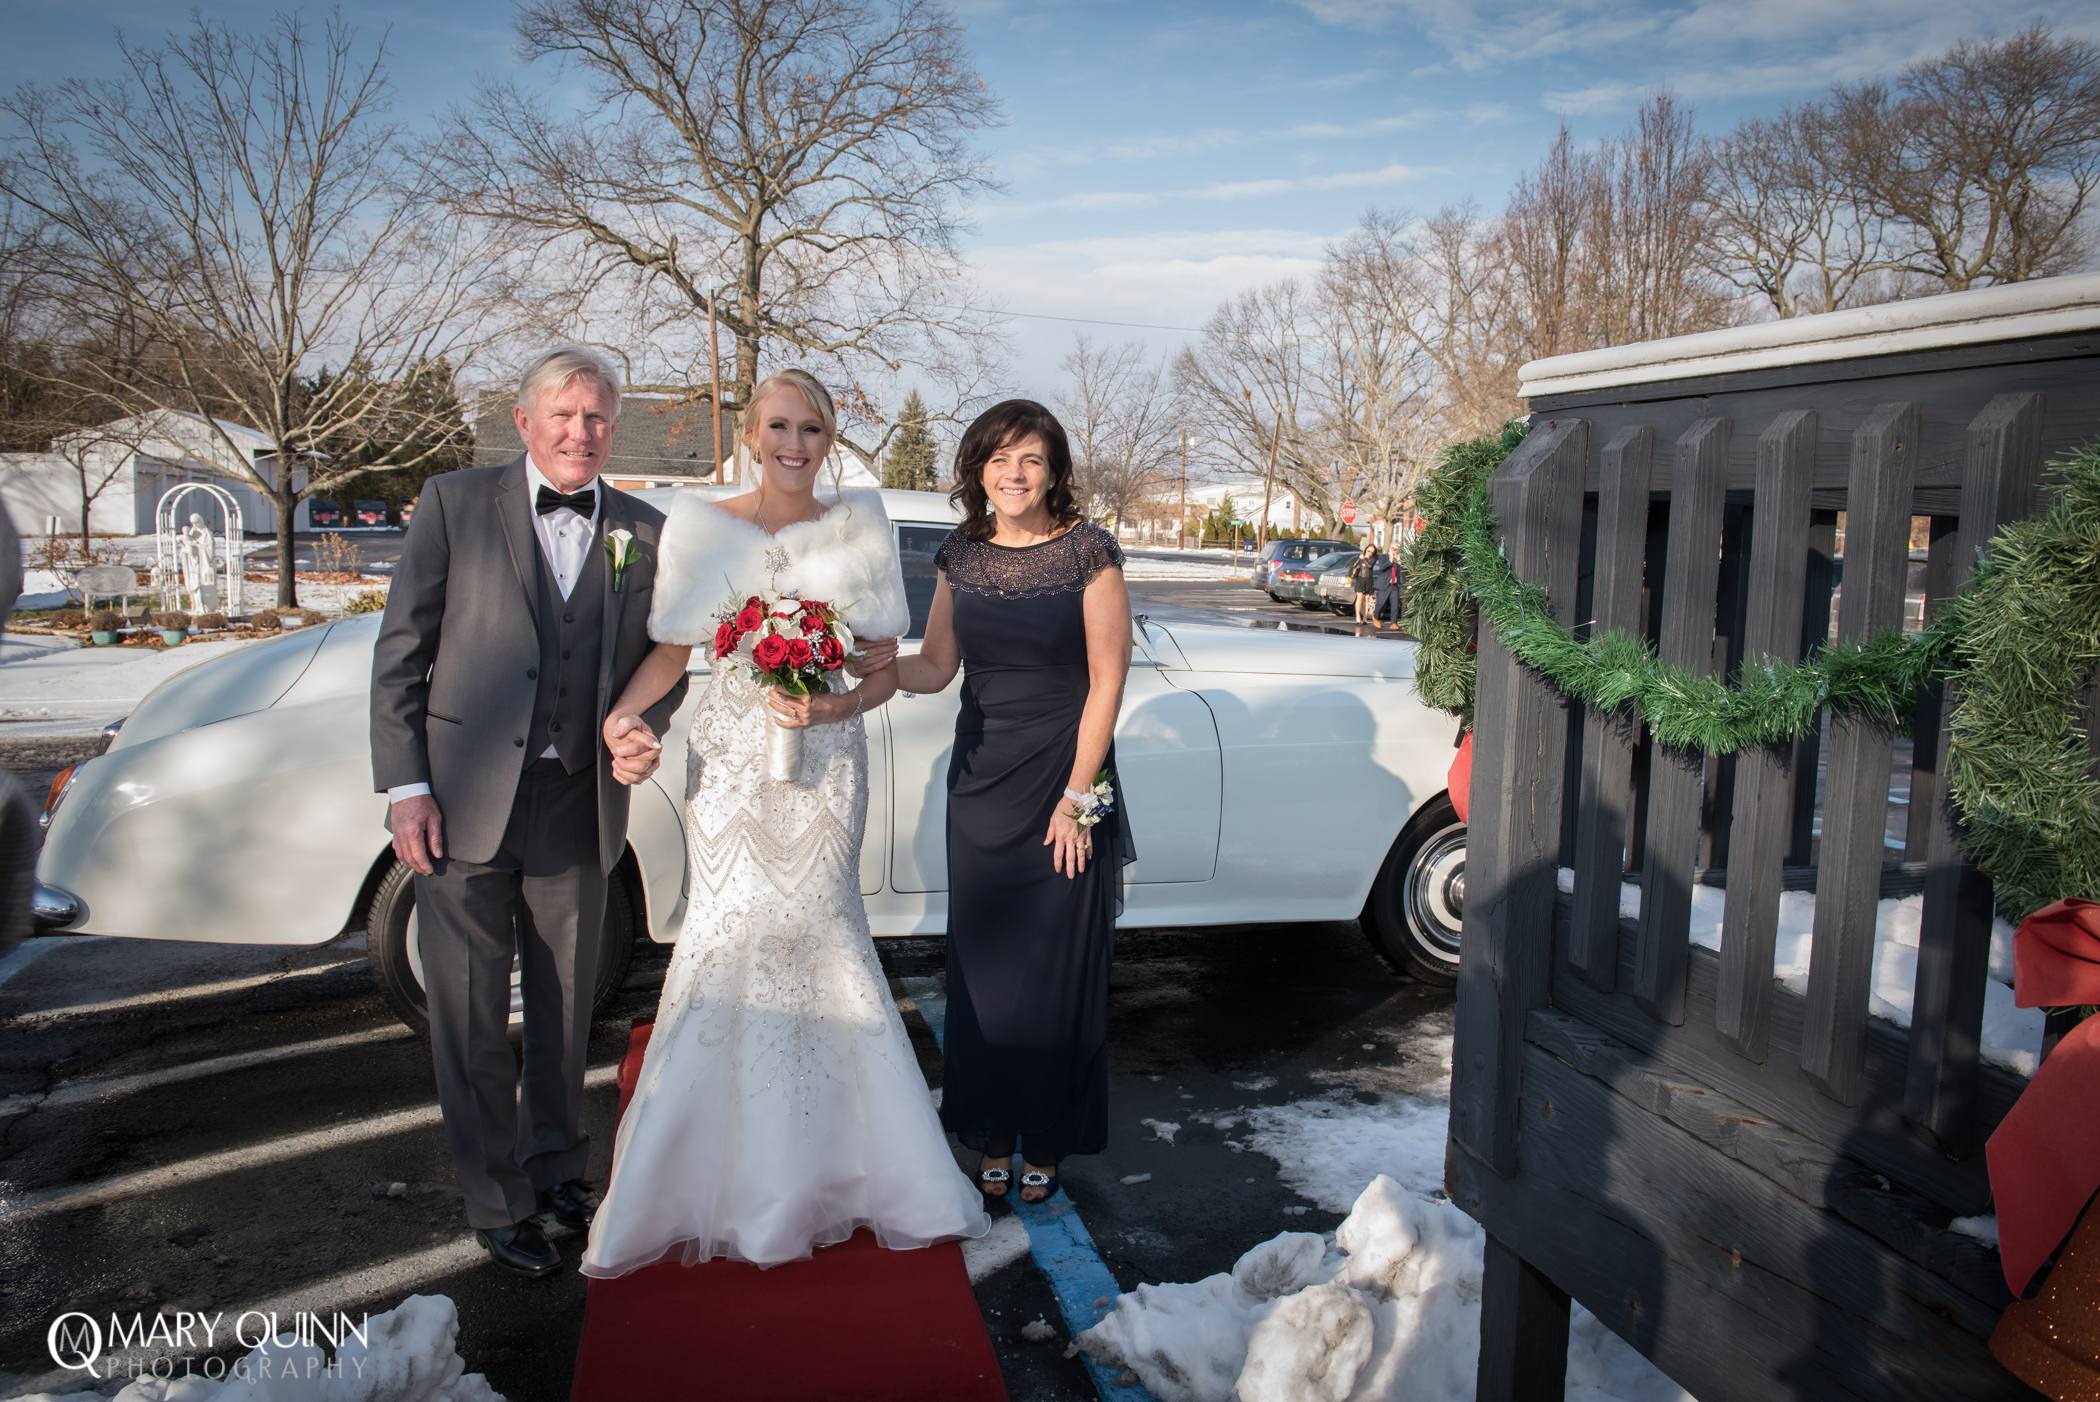 Our Lady Queen of Peace Hainesport New Jersey Wedding Photographer